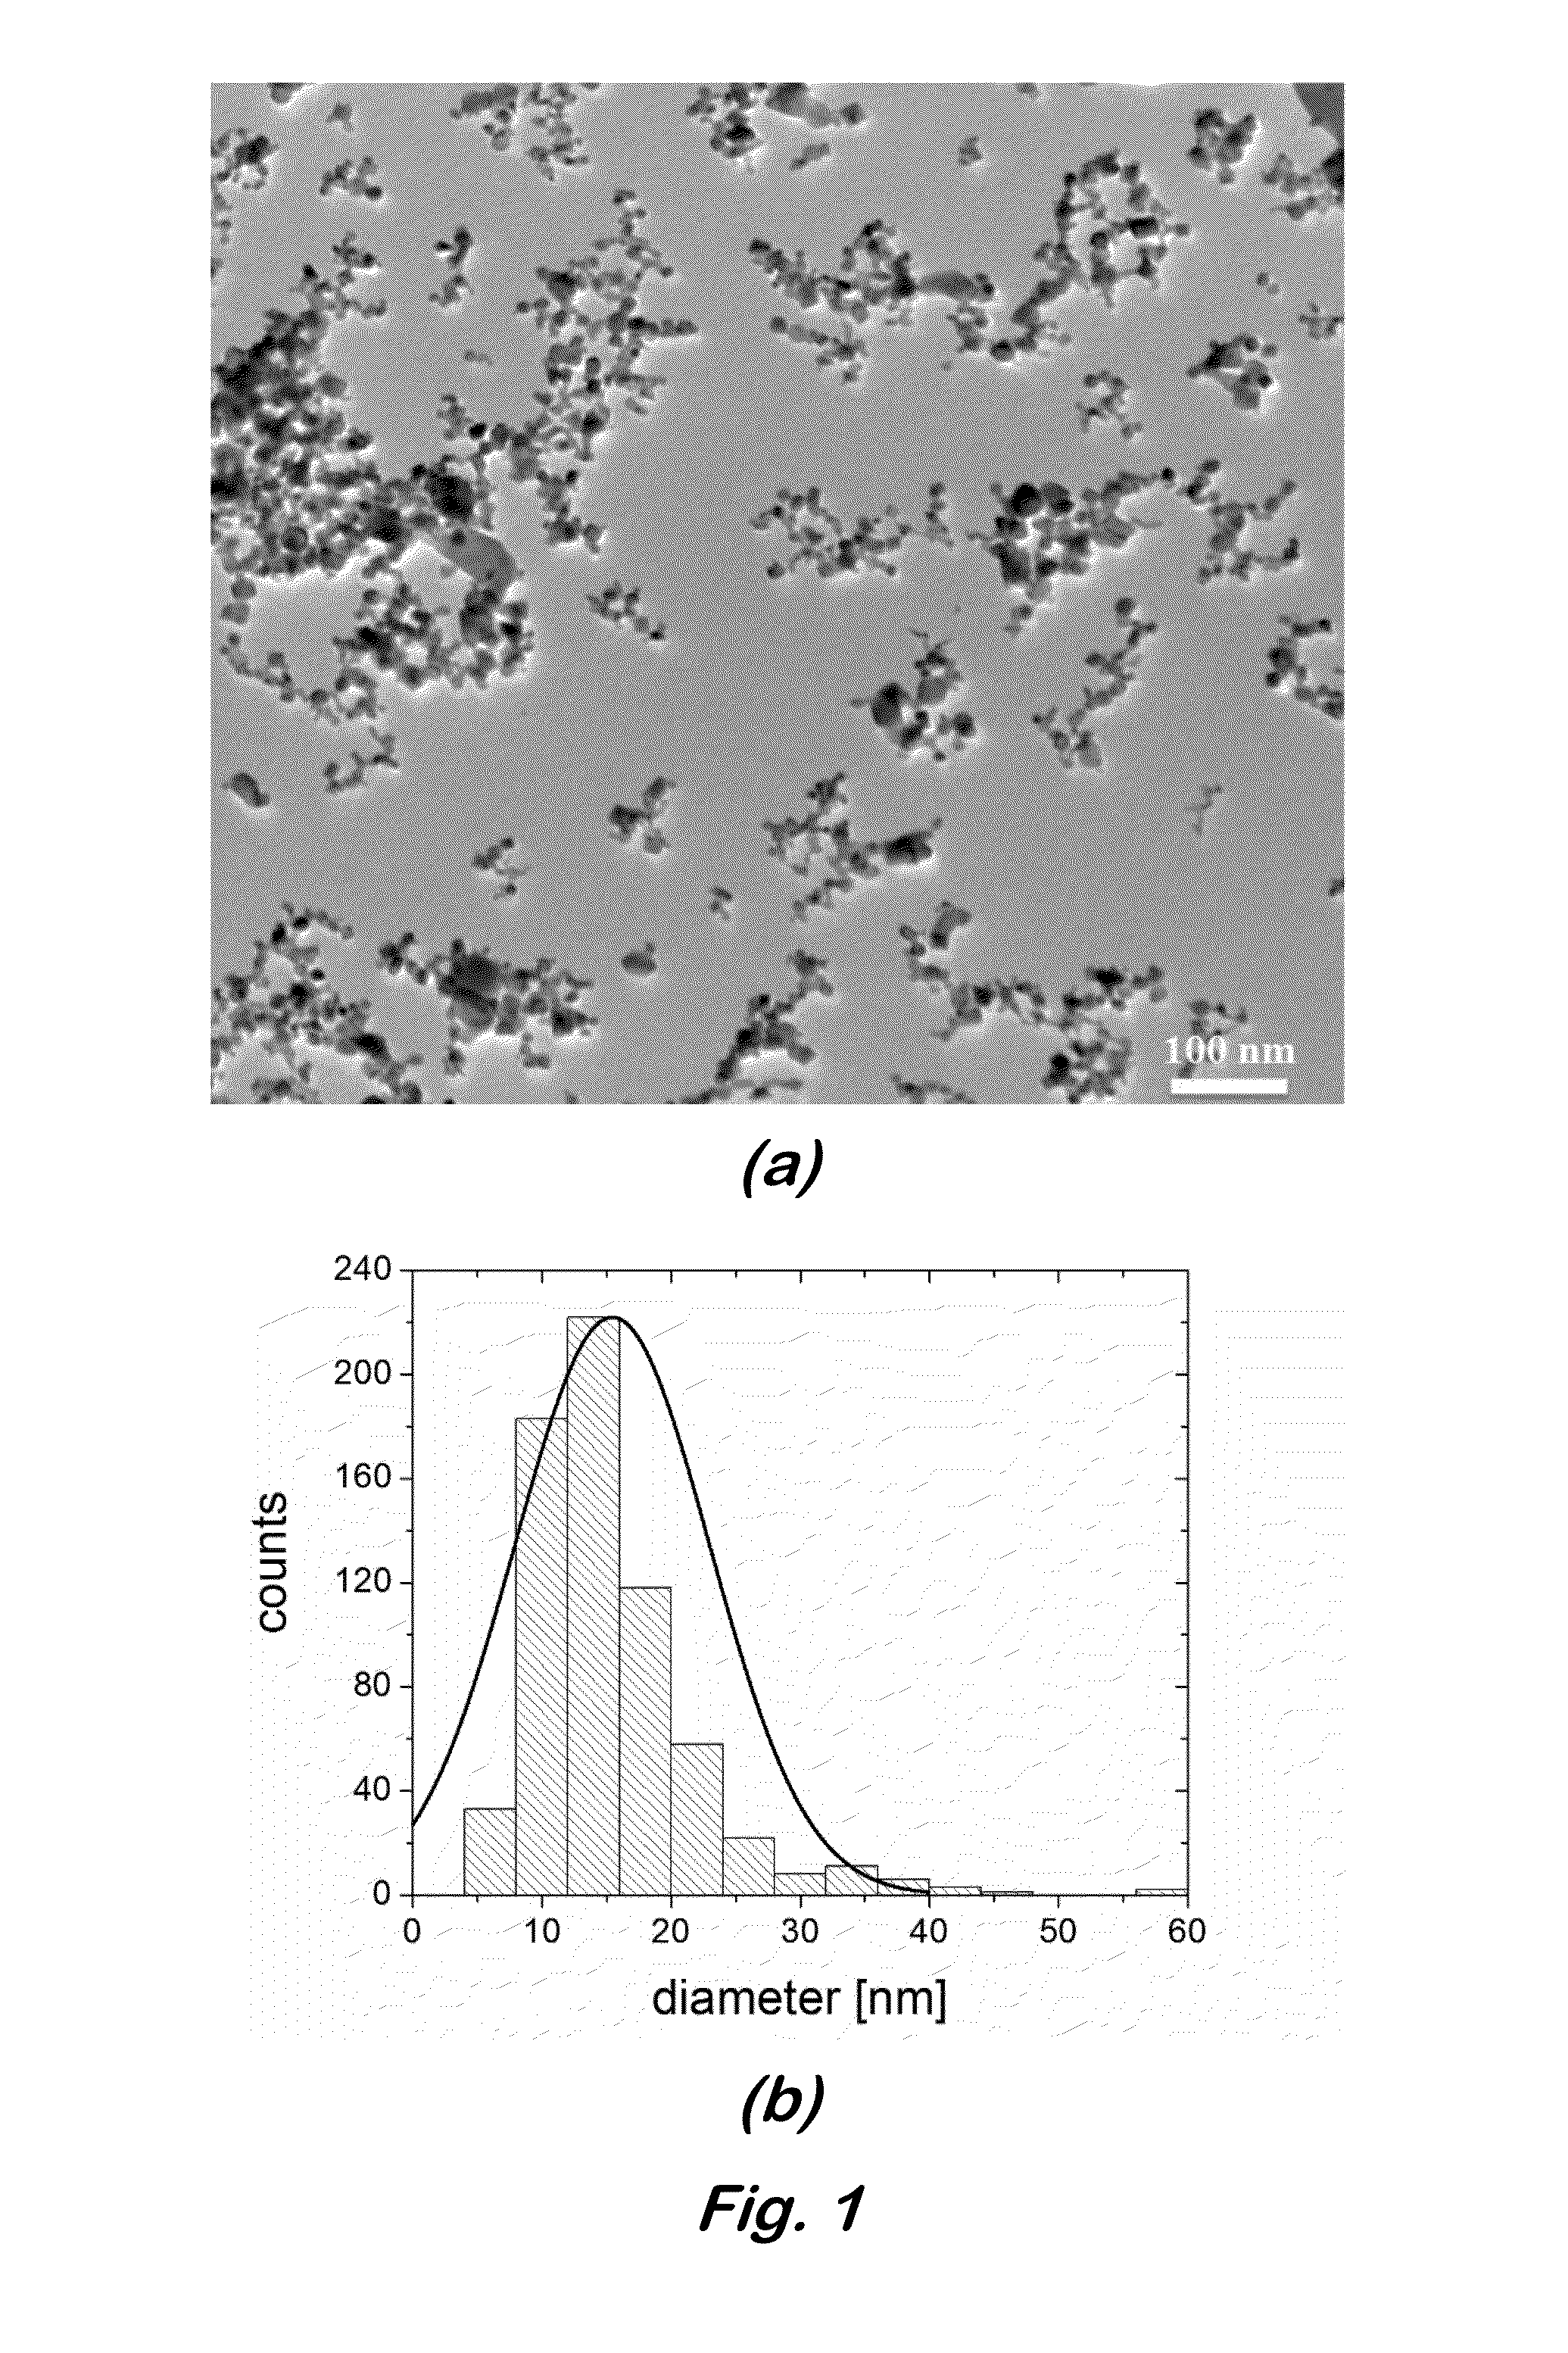 FLAME SPRAY SYNTHESIS OF Lu2O3 NANOPARTICLES